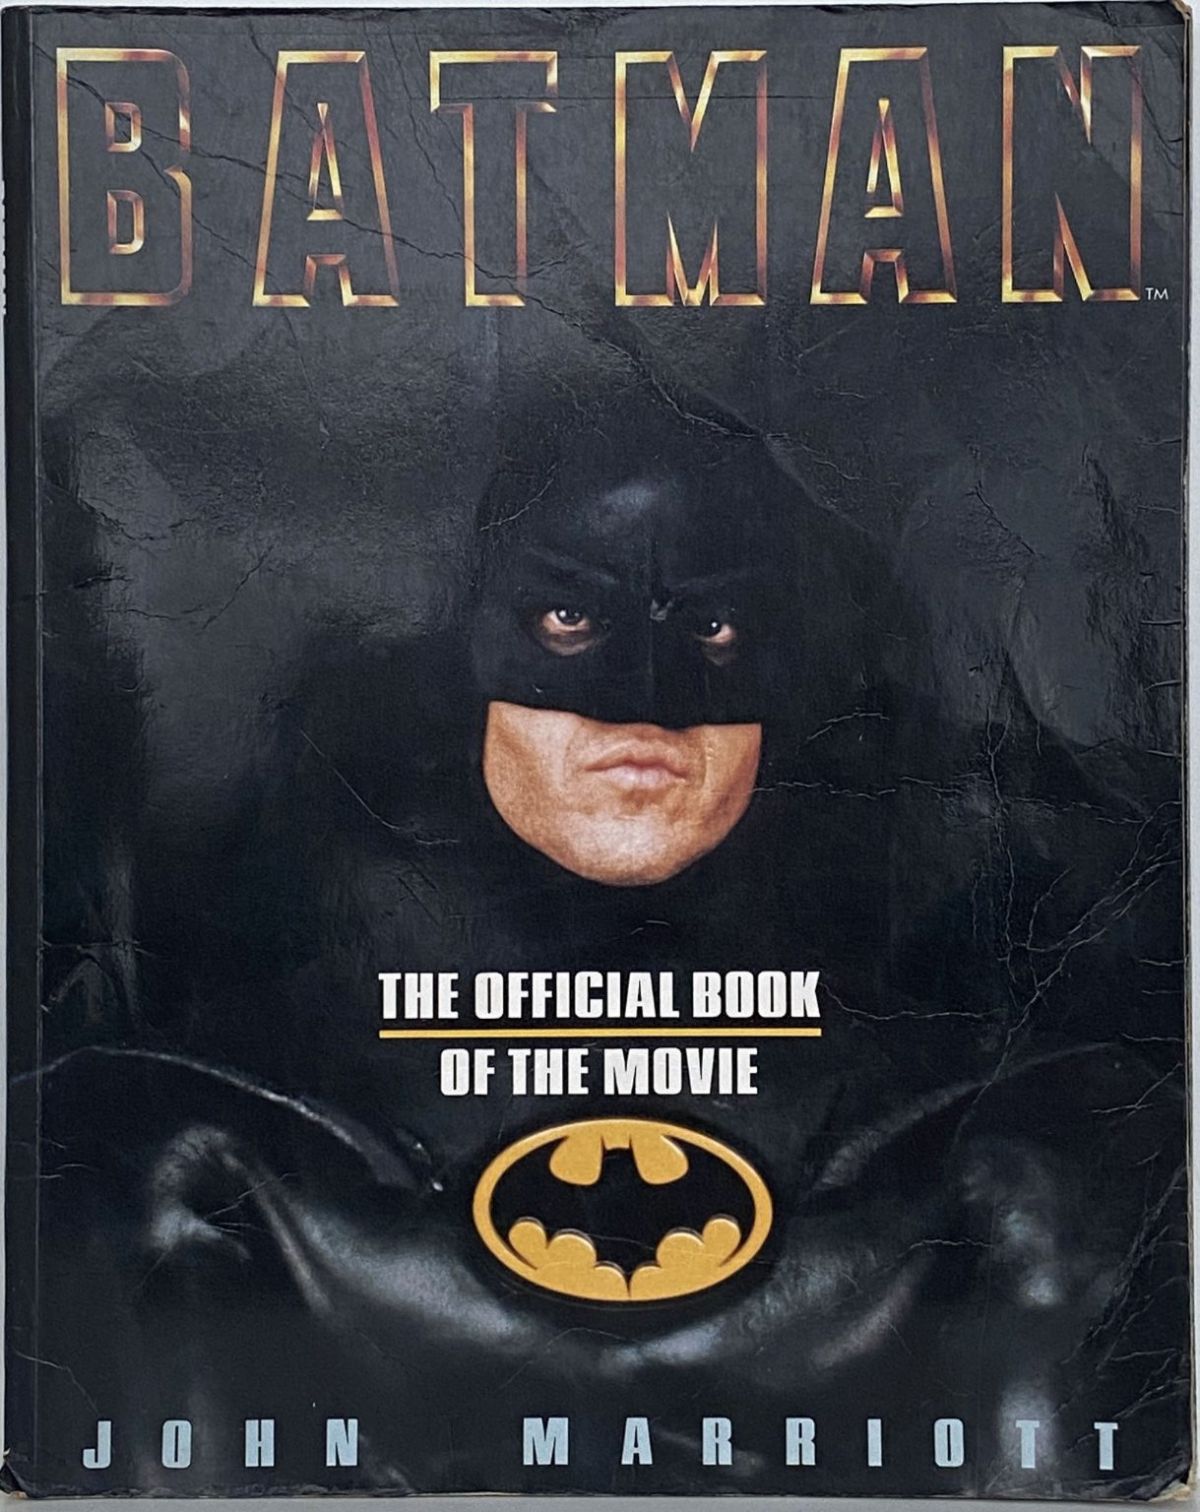 BATMAN: The Official Book of The Movie